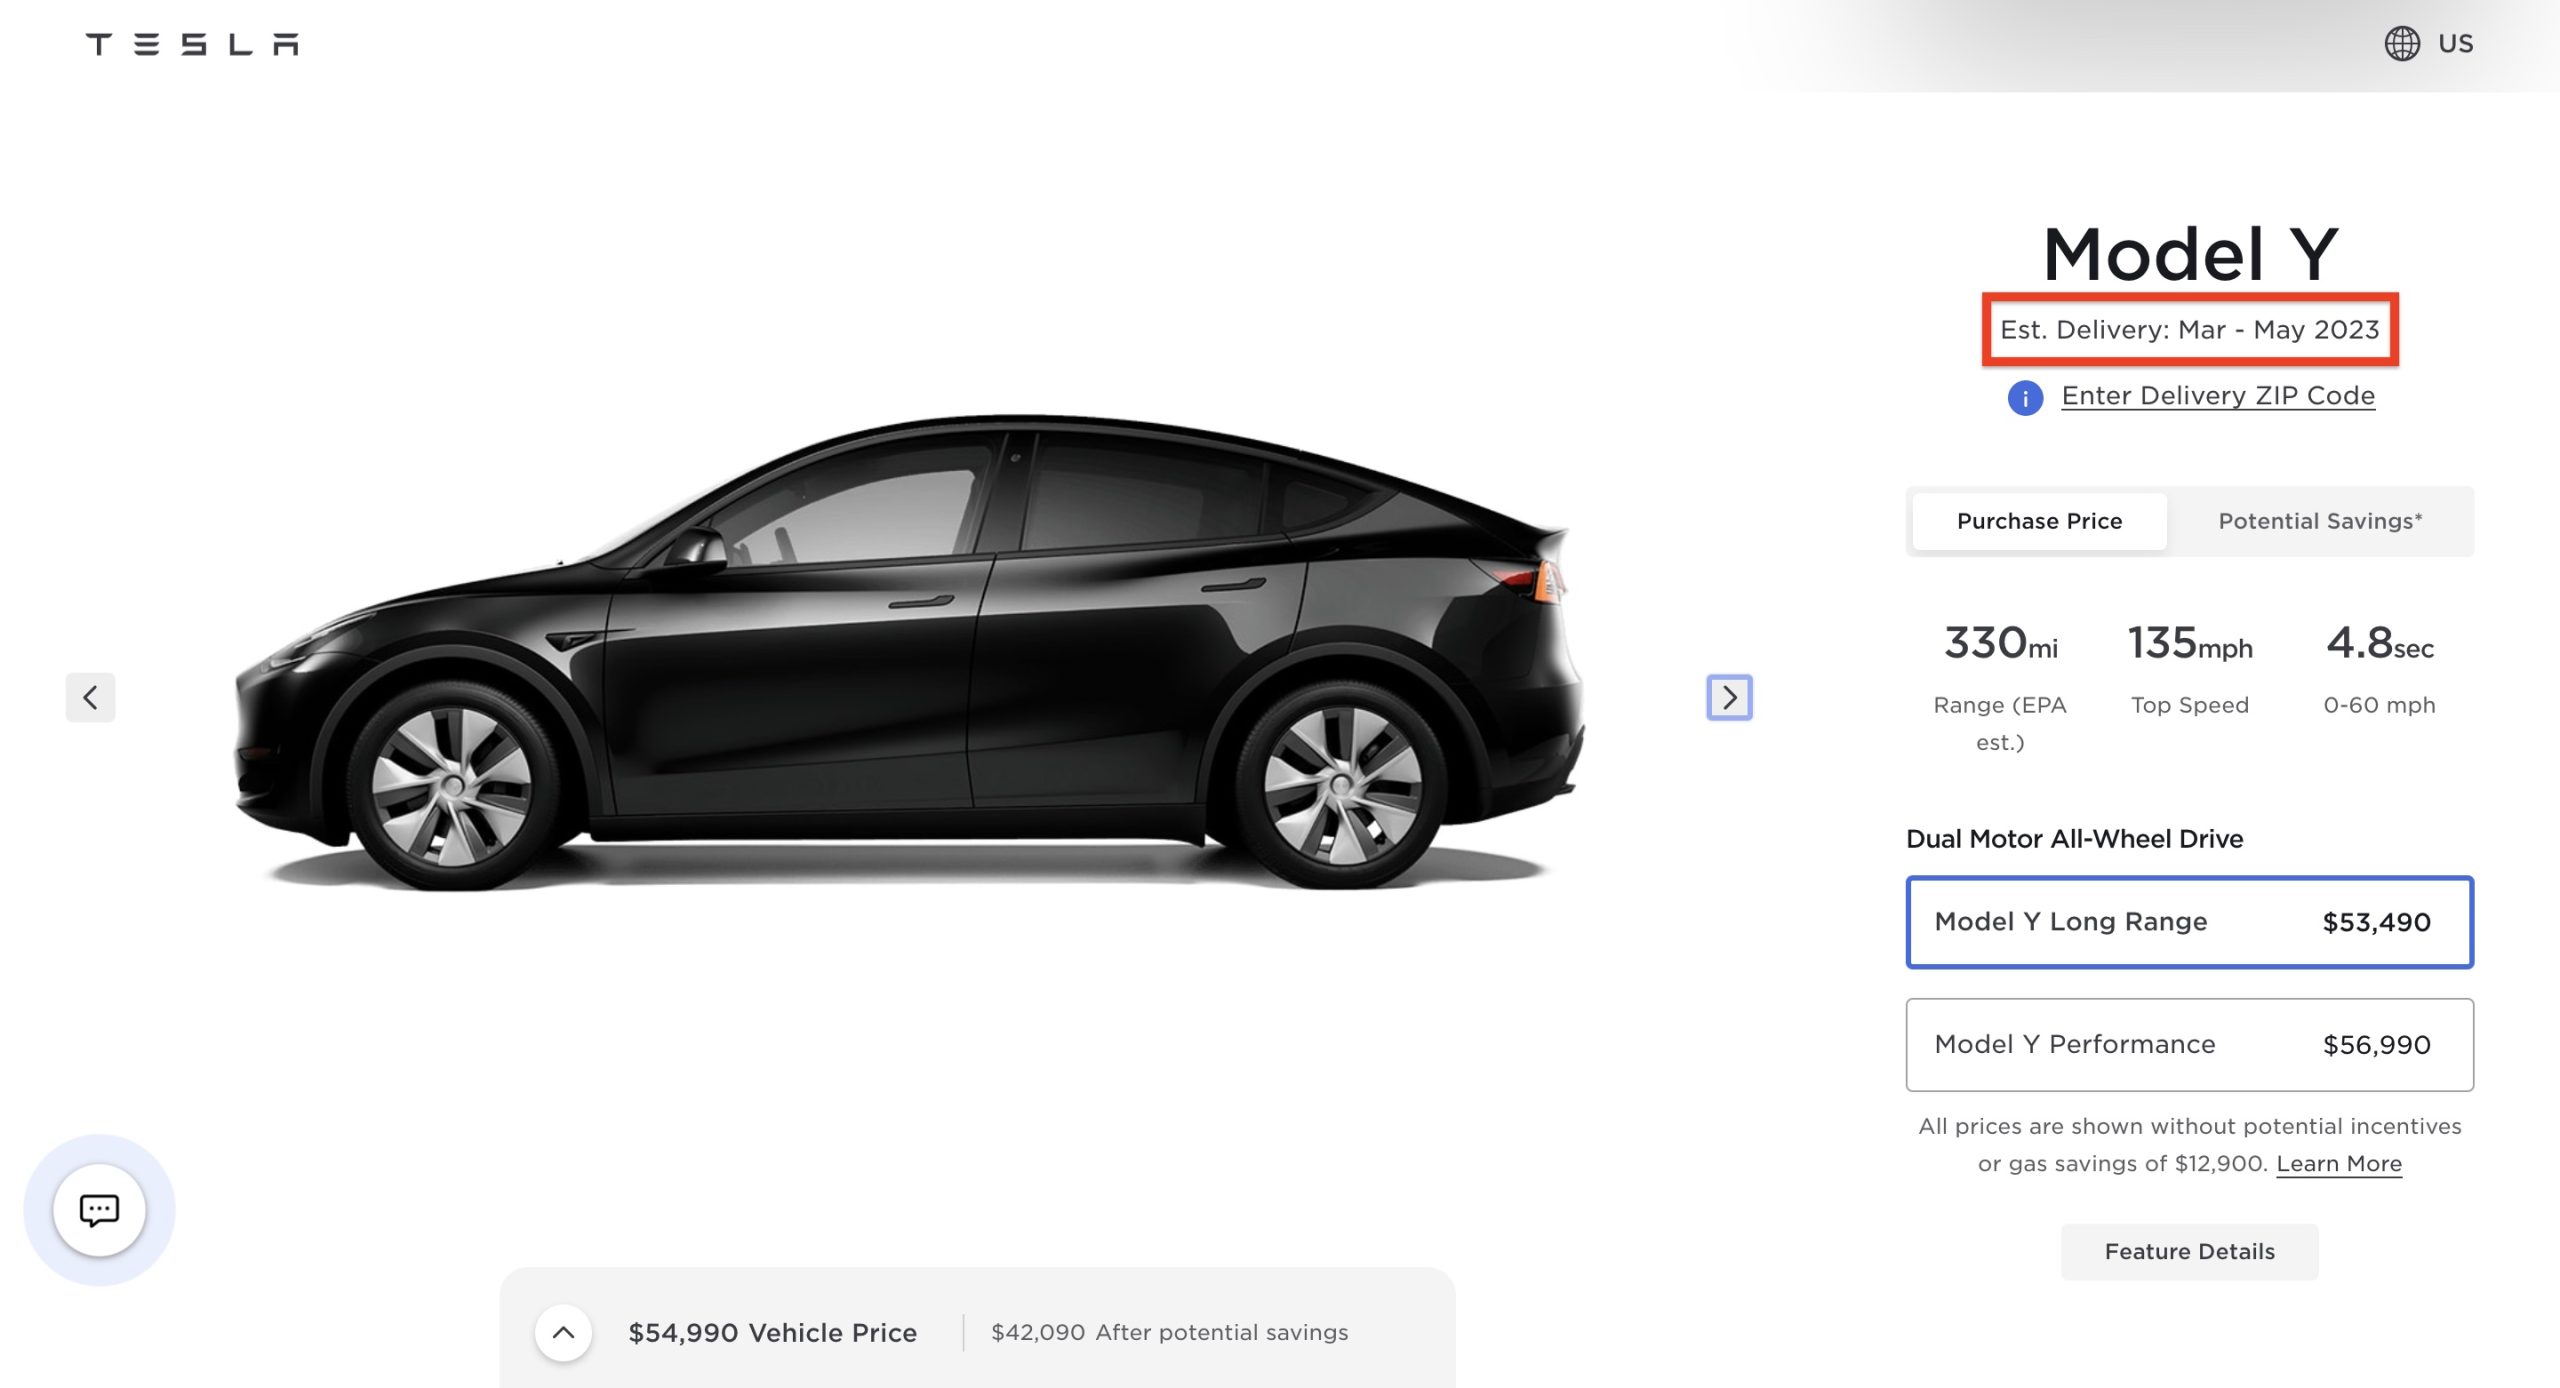 Tesla Model Y Long Range Delivery Estimates Moved to March May 2023 Reflecting High Demand - Tesla Model Y Long Range Delivery Estimates Moved to March-May 2023, Reflecting High Demand